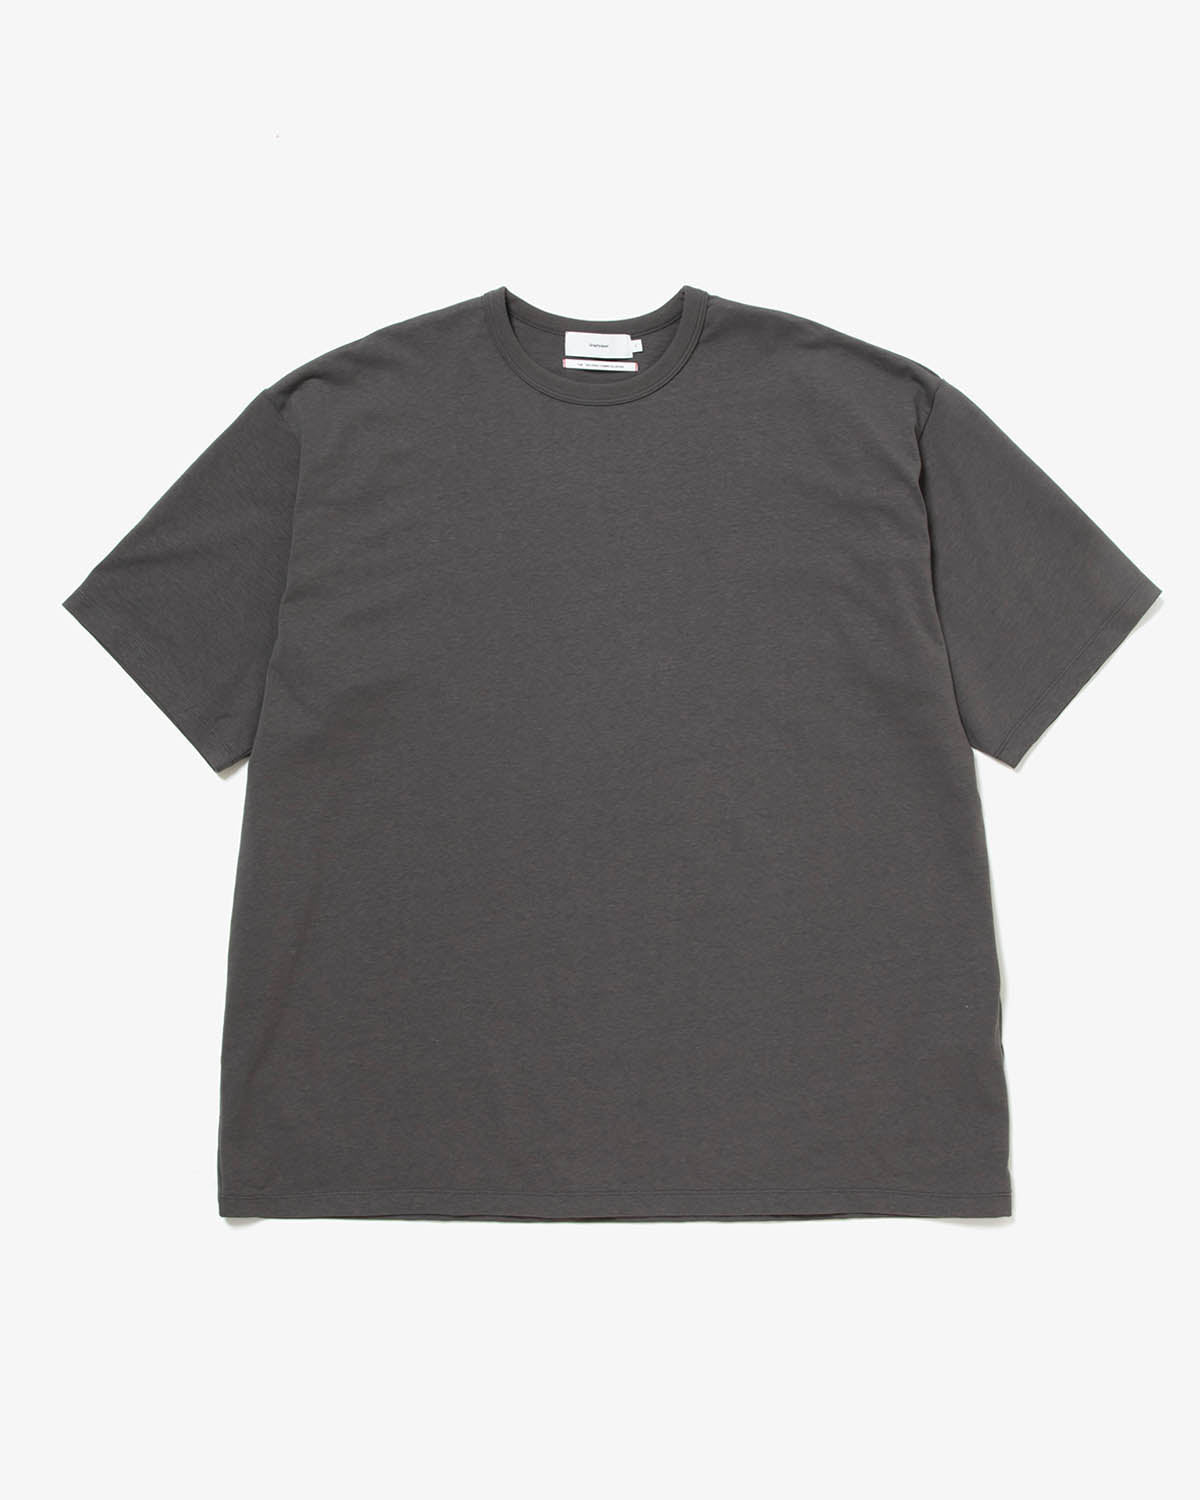 RECYCLED COTTON JERSEY S/S TEE – COVERCHORD